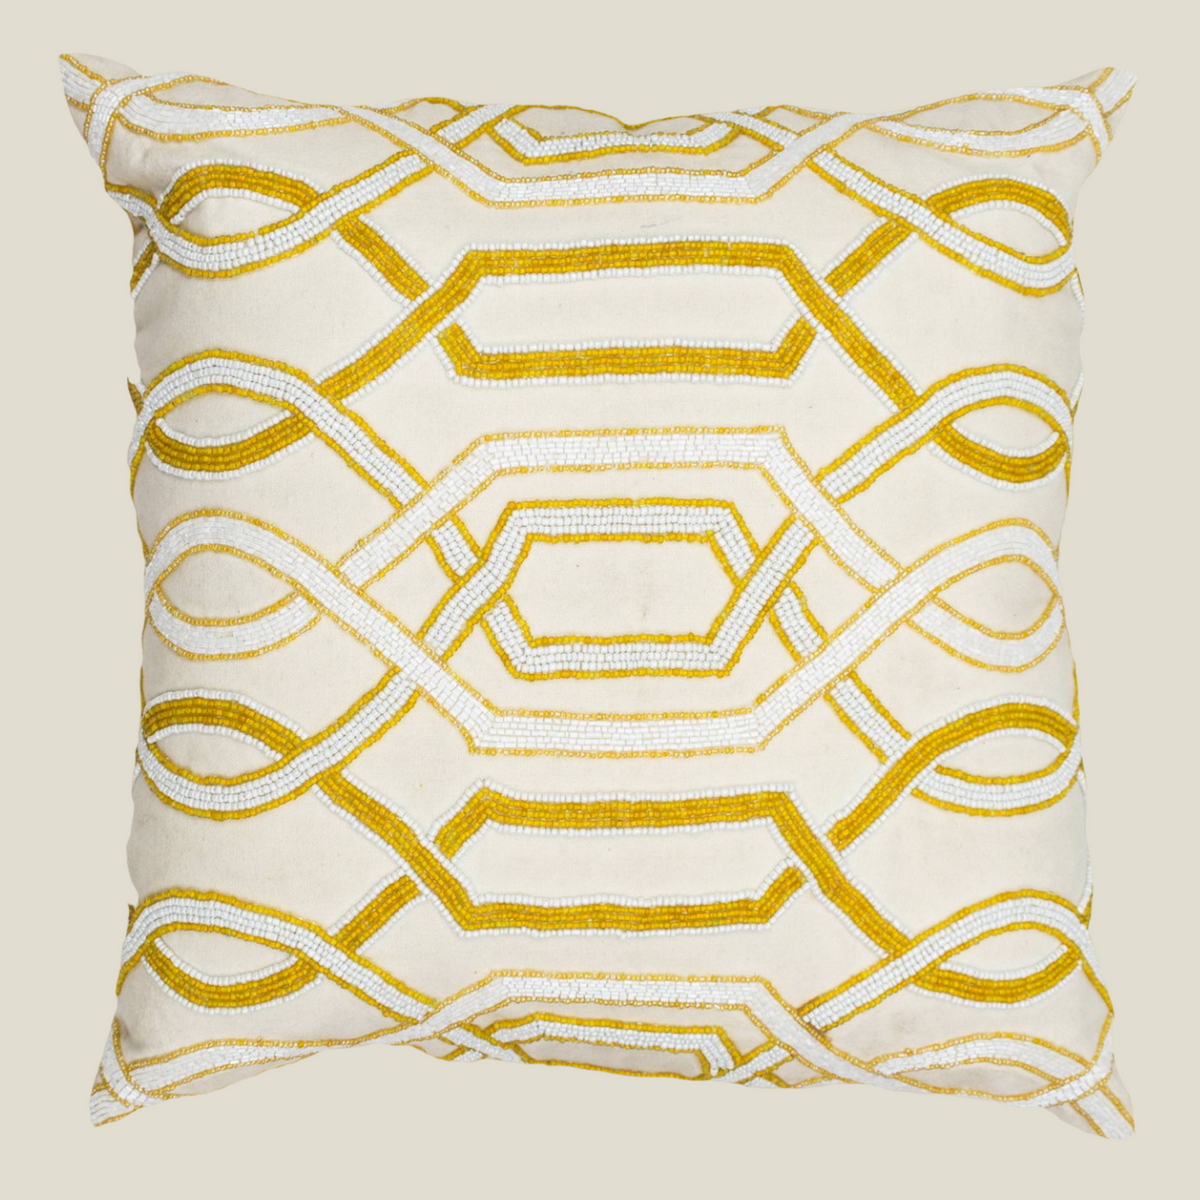 The Luxelife Handcrafted Yellow Cushion Cover (Embroidered)